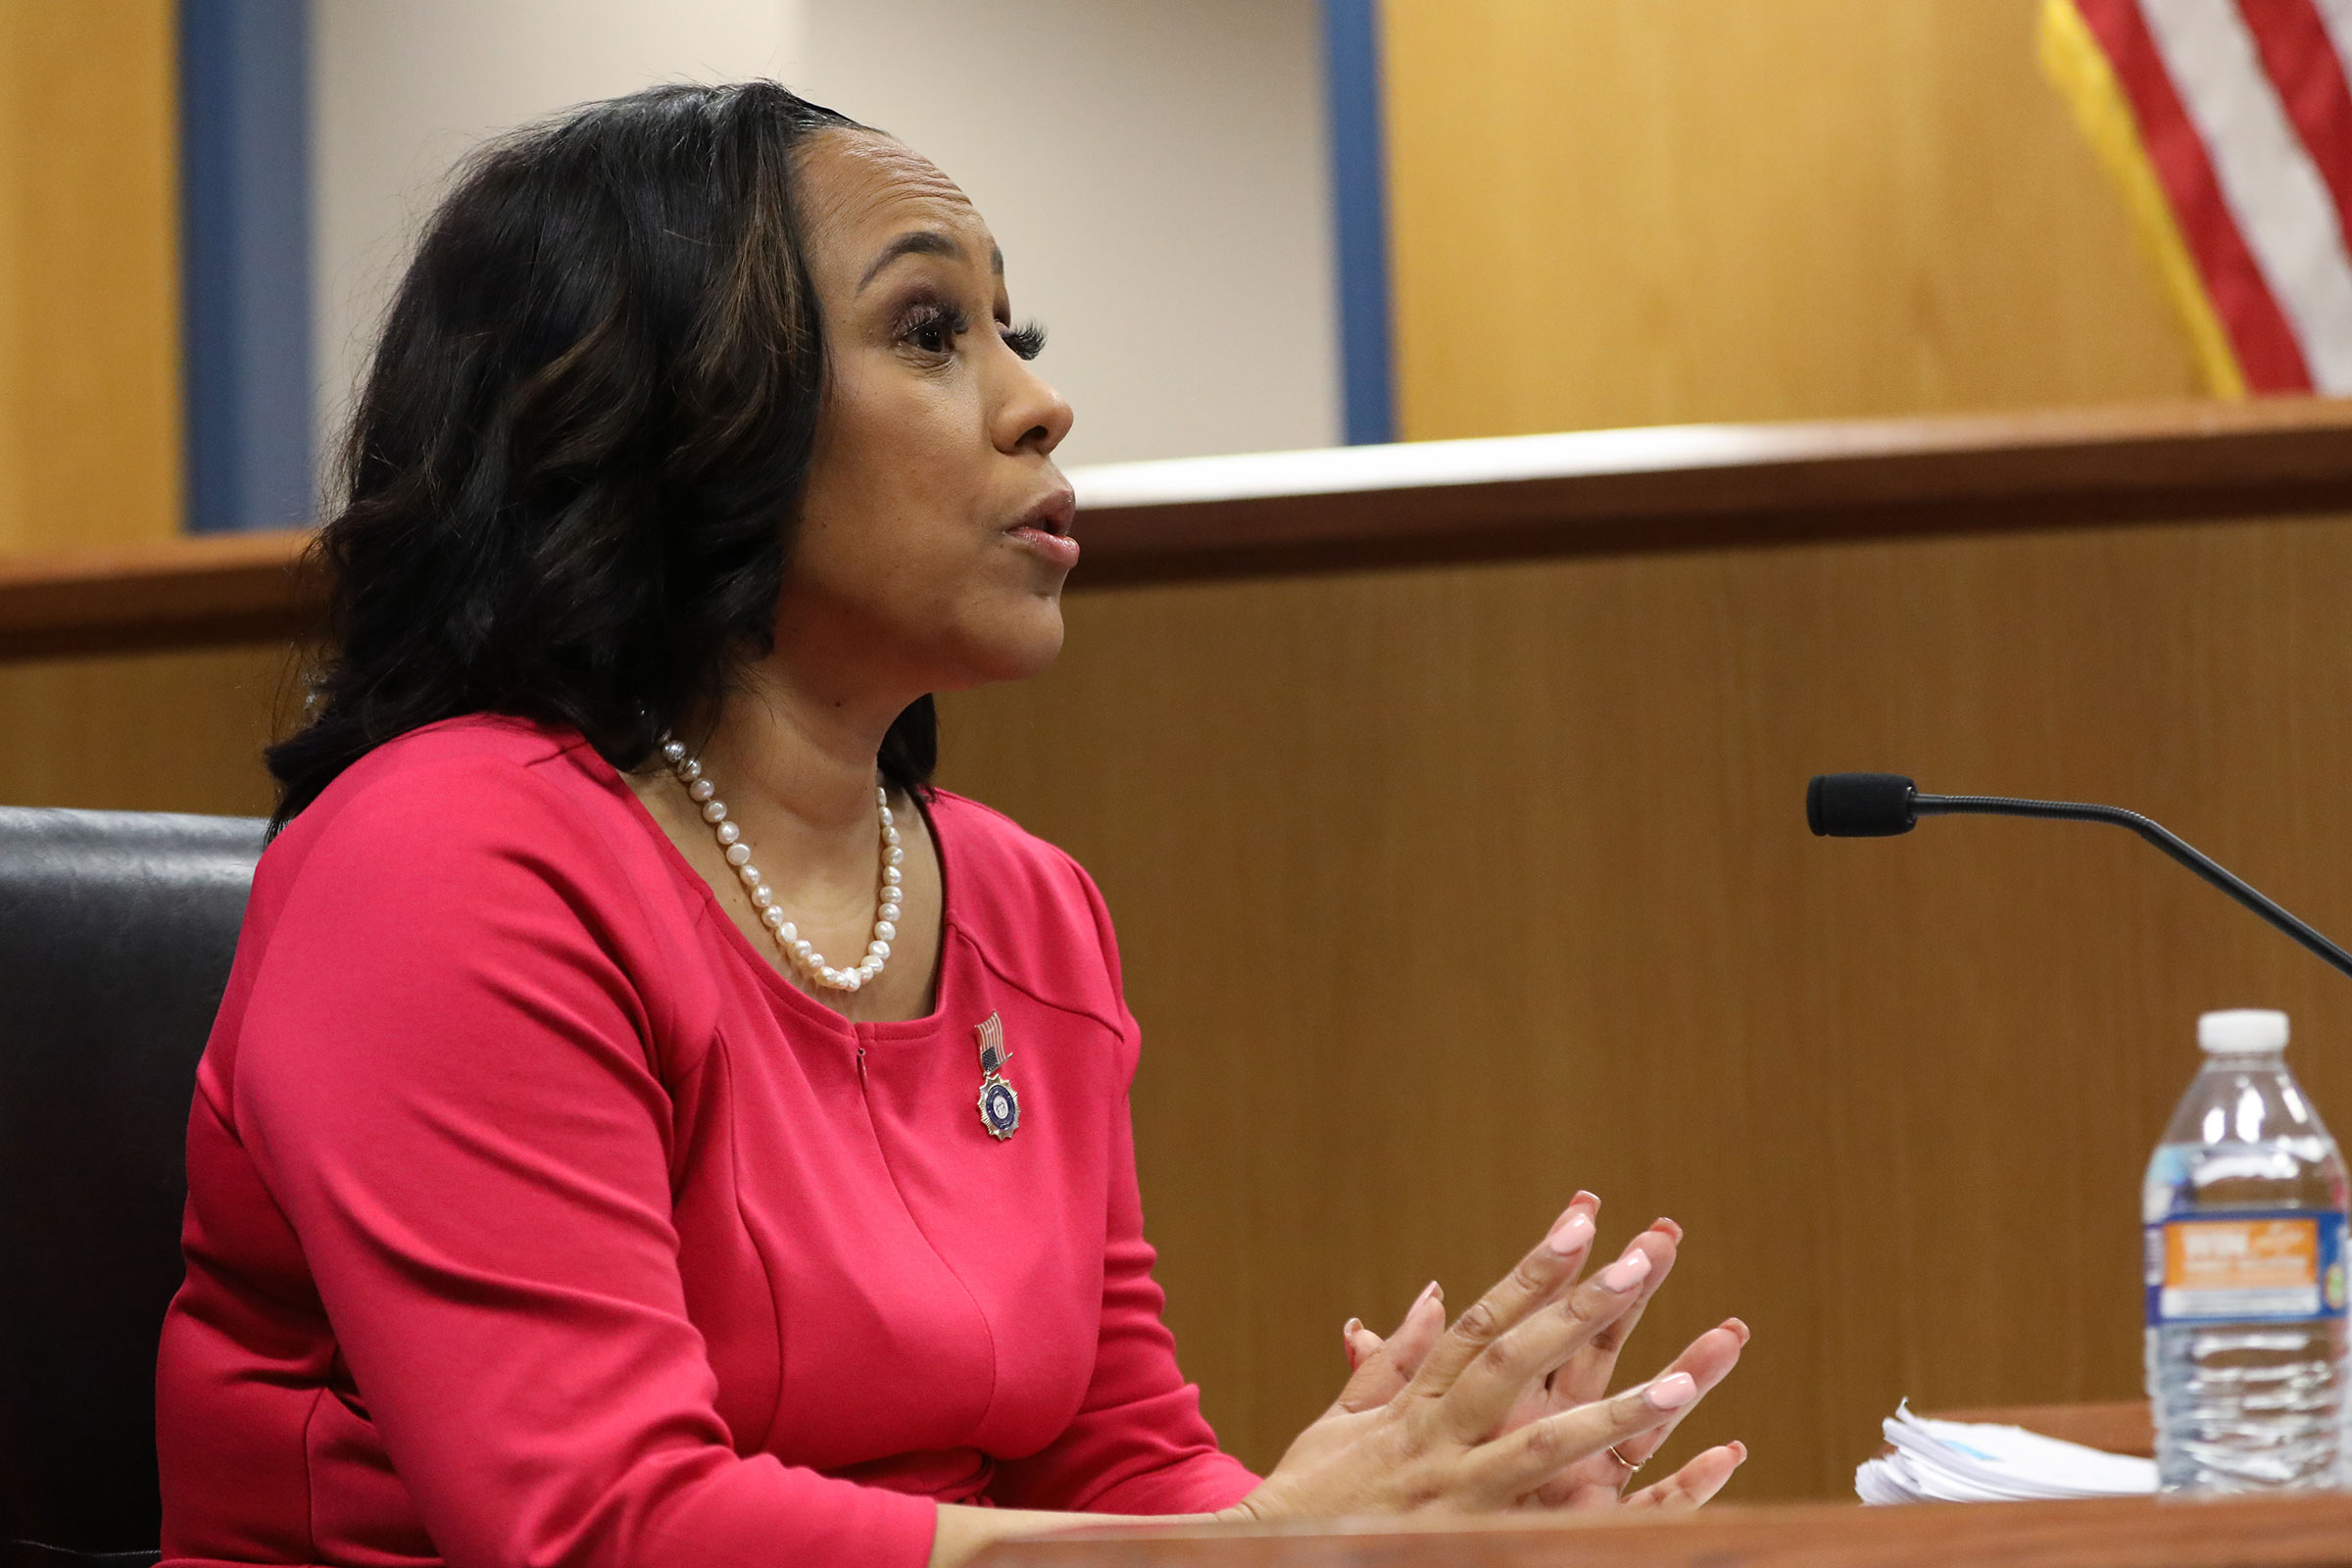 Fulton County District Attorney Fani Willis testifies during a hearing in the case of the State of Georgia v. Donald John Trump at the Fulton County Courthouse on February 15, 2024 in Atlanta, Georgia.